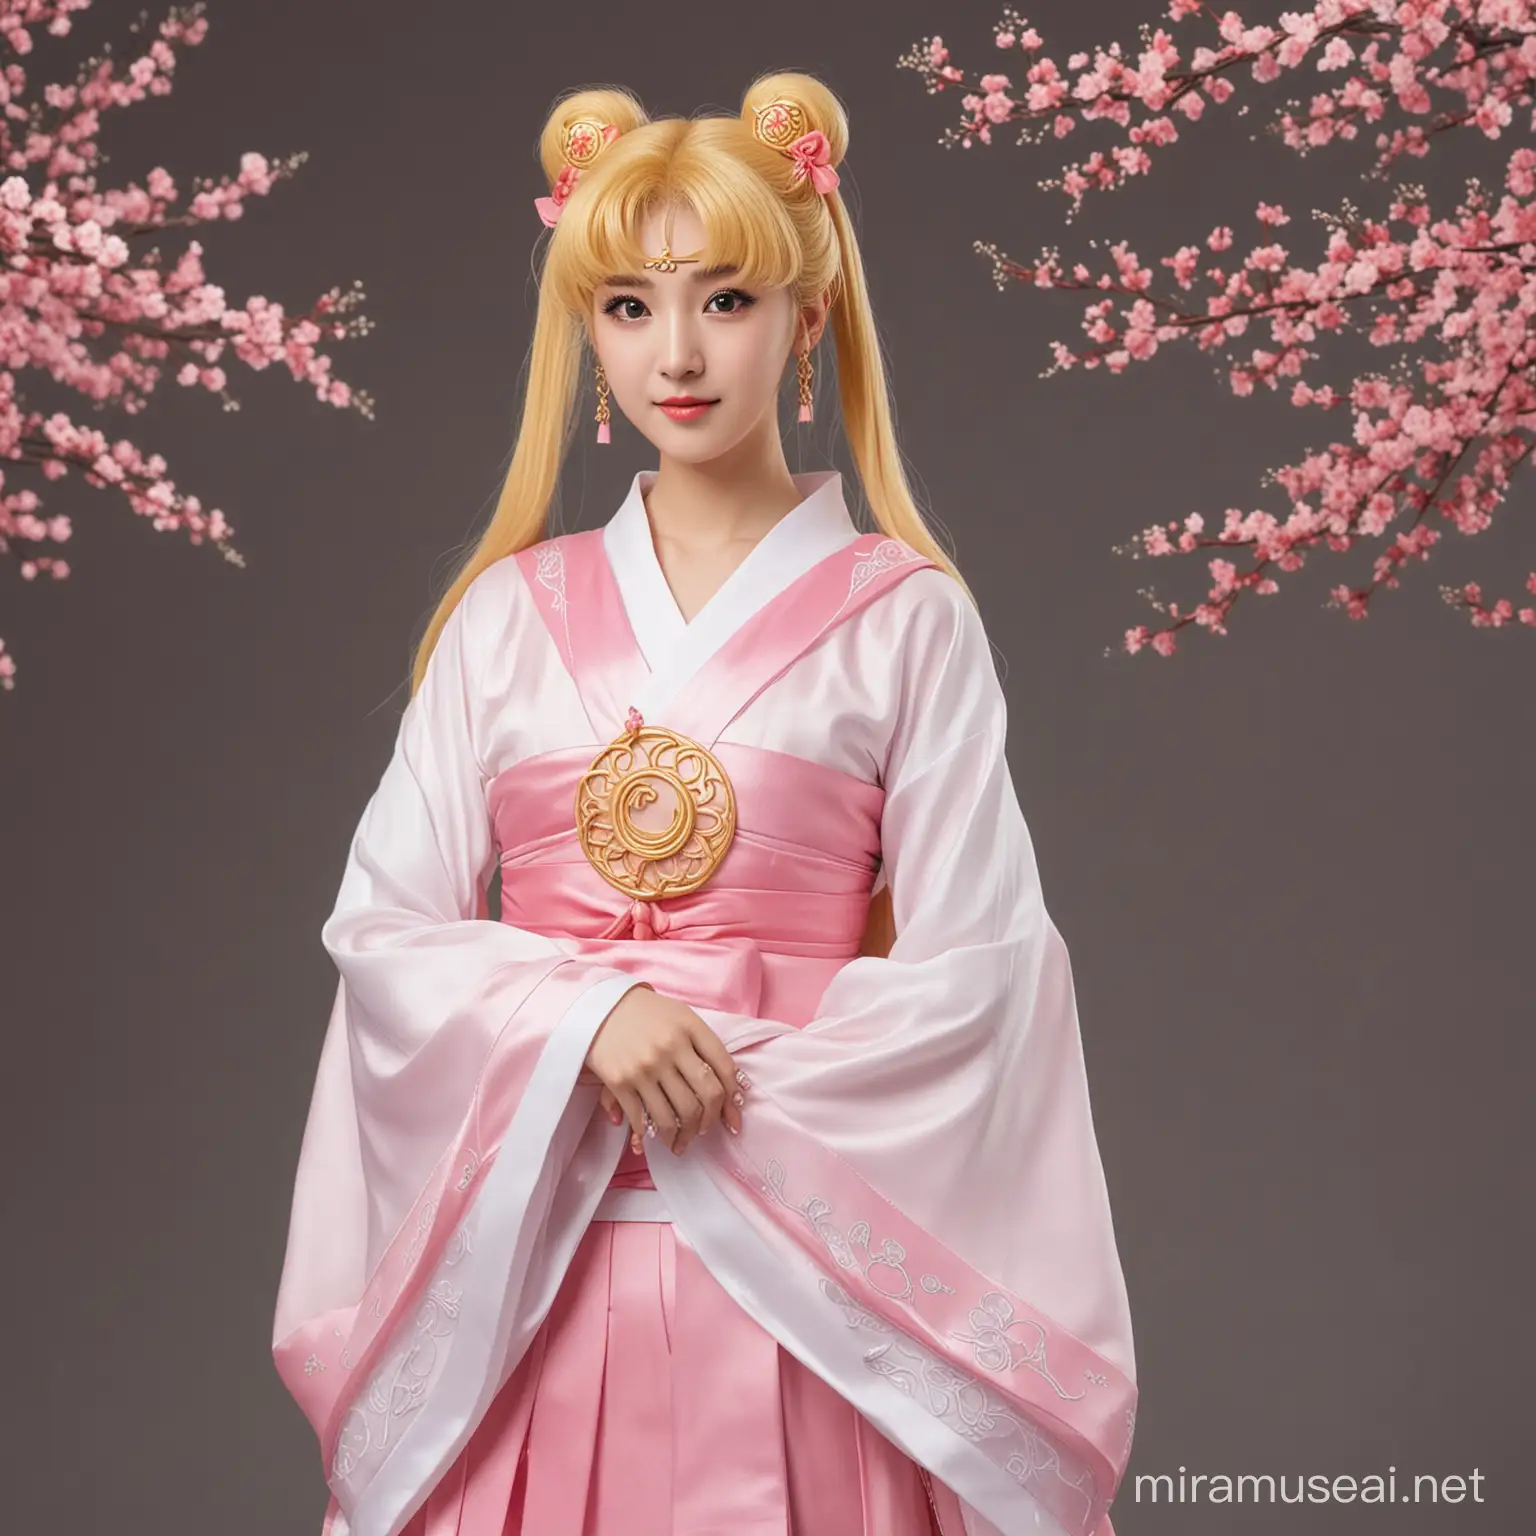 sailor moon in a hanfu outfit